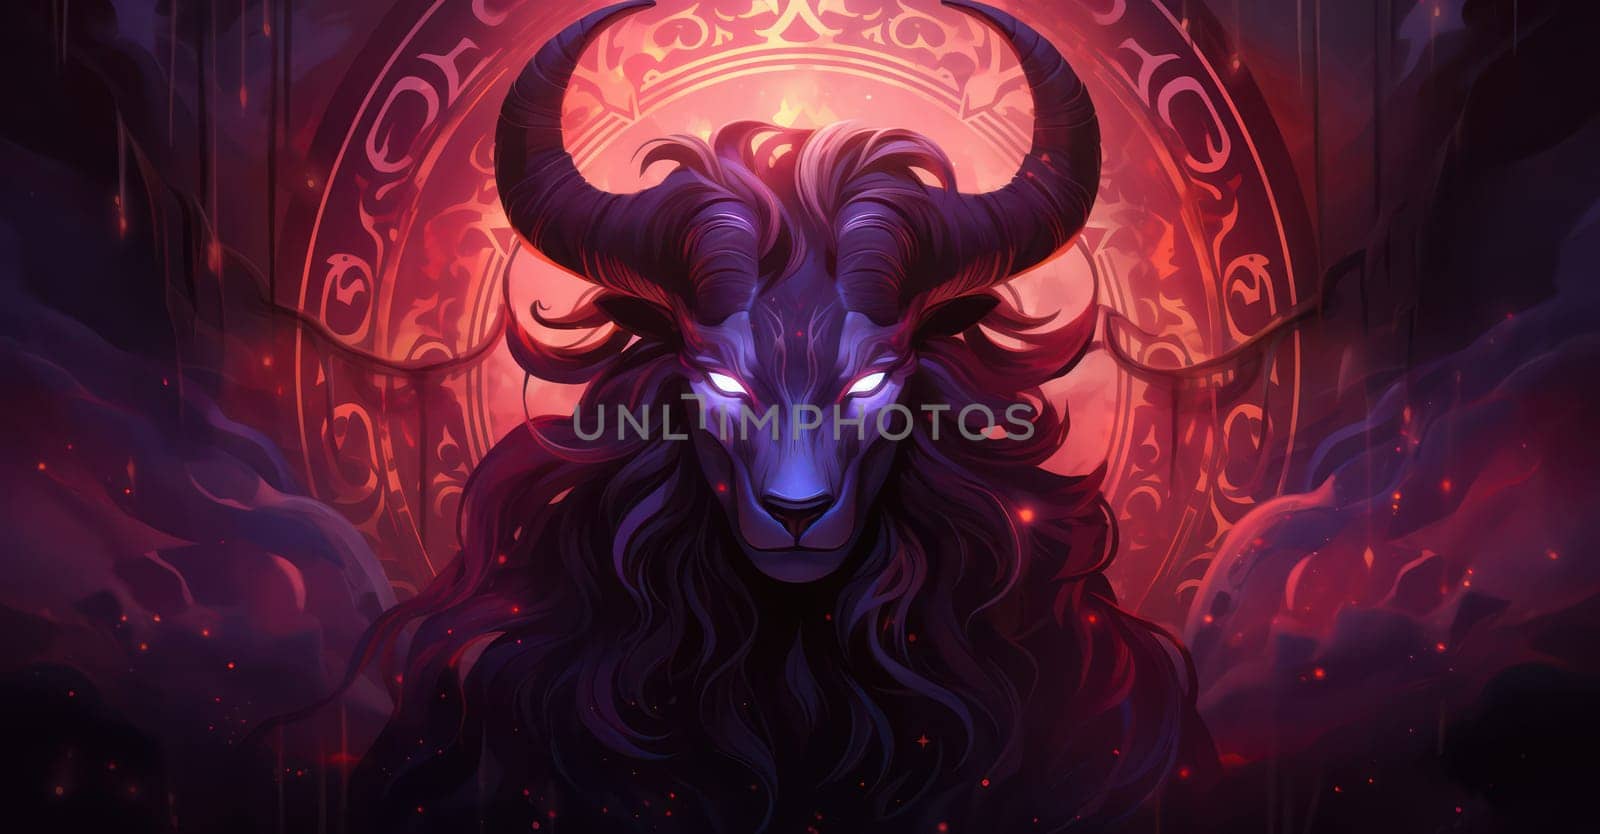 Sacred Horn: A Mystic Illustration of a Wild Ram, Symbol of Witchcraft and Esoteric Spirit by Vichizh